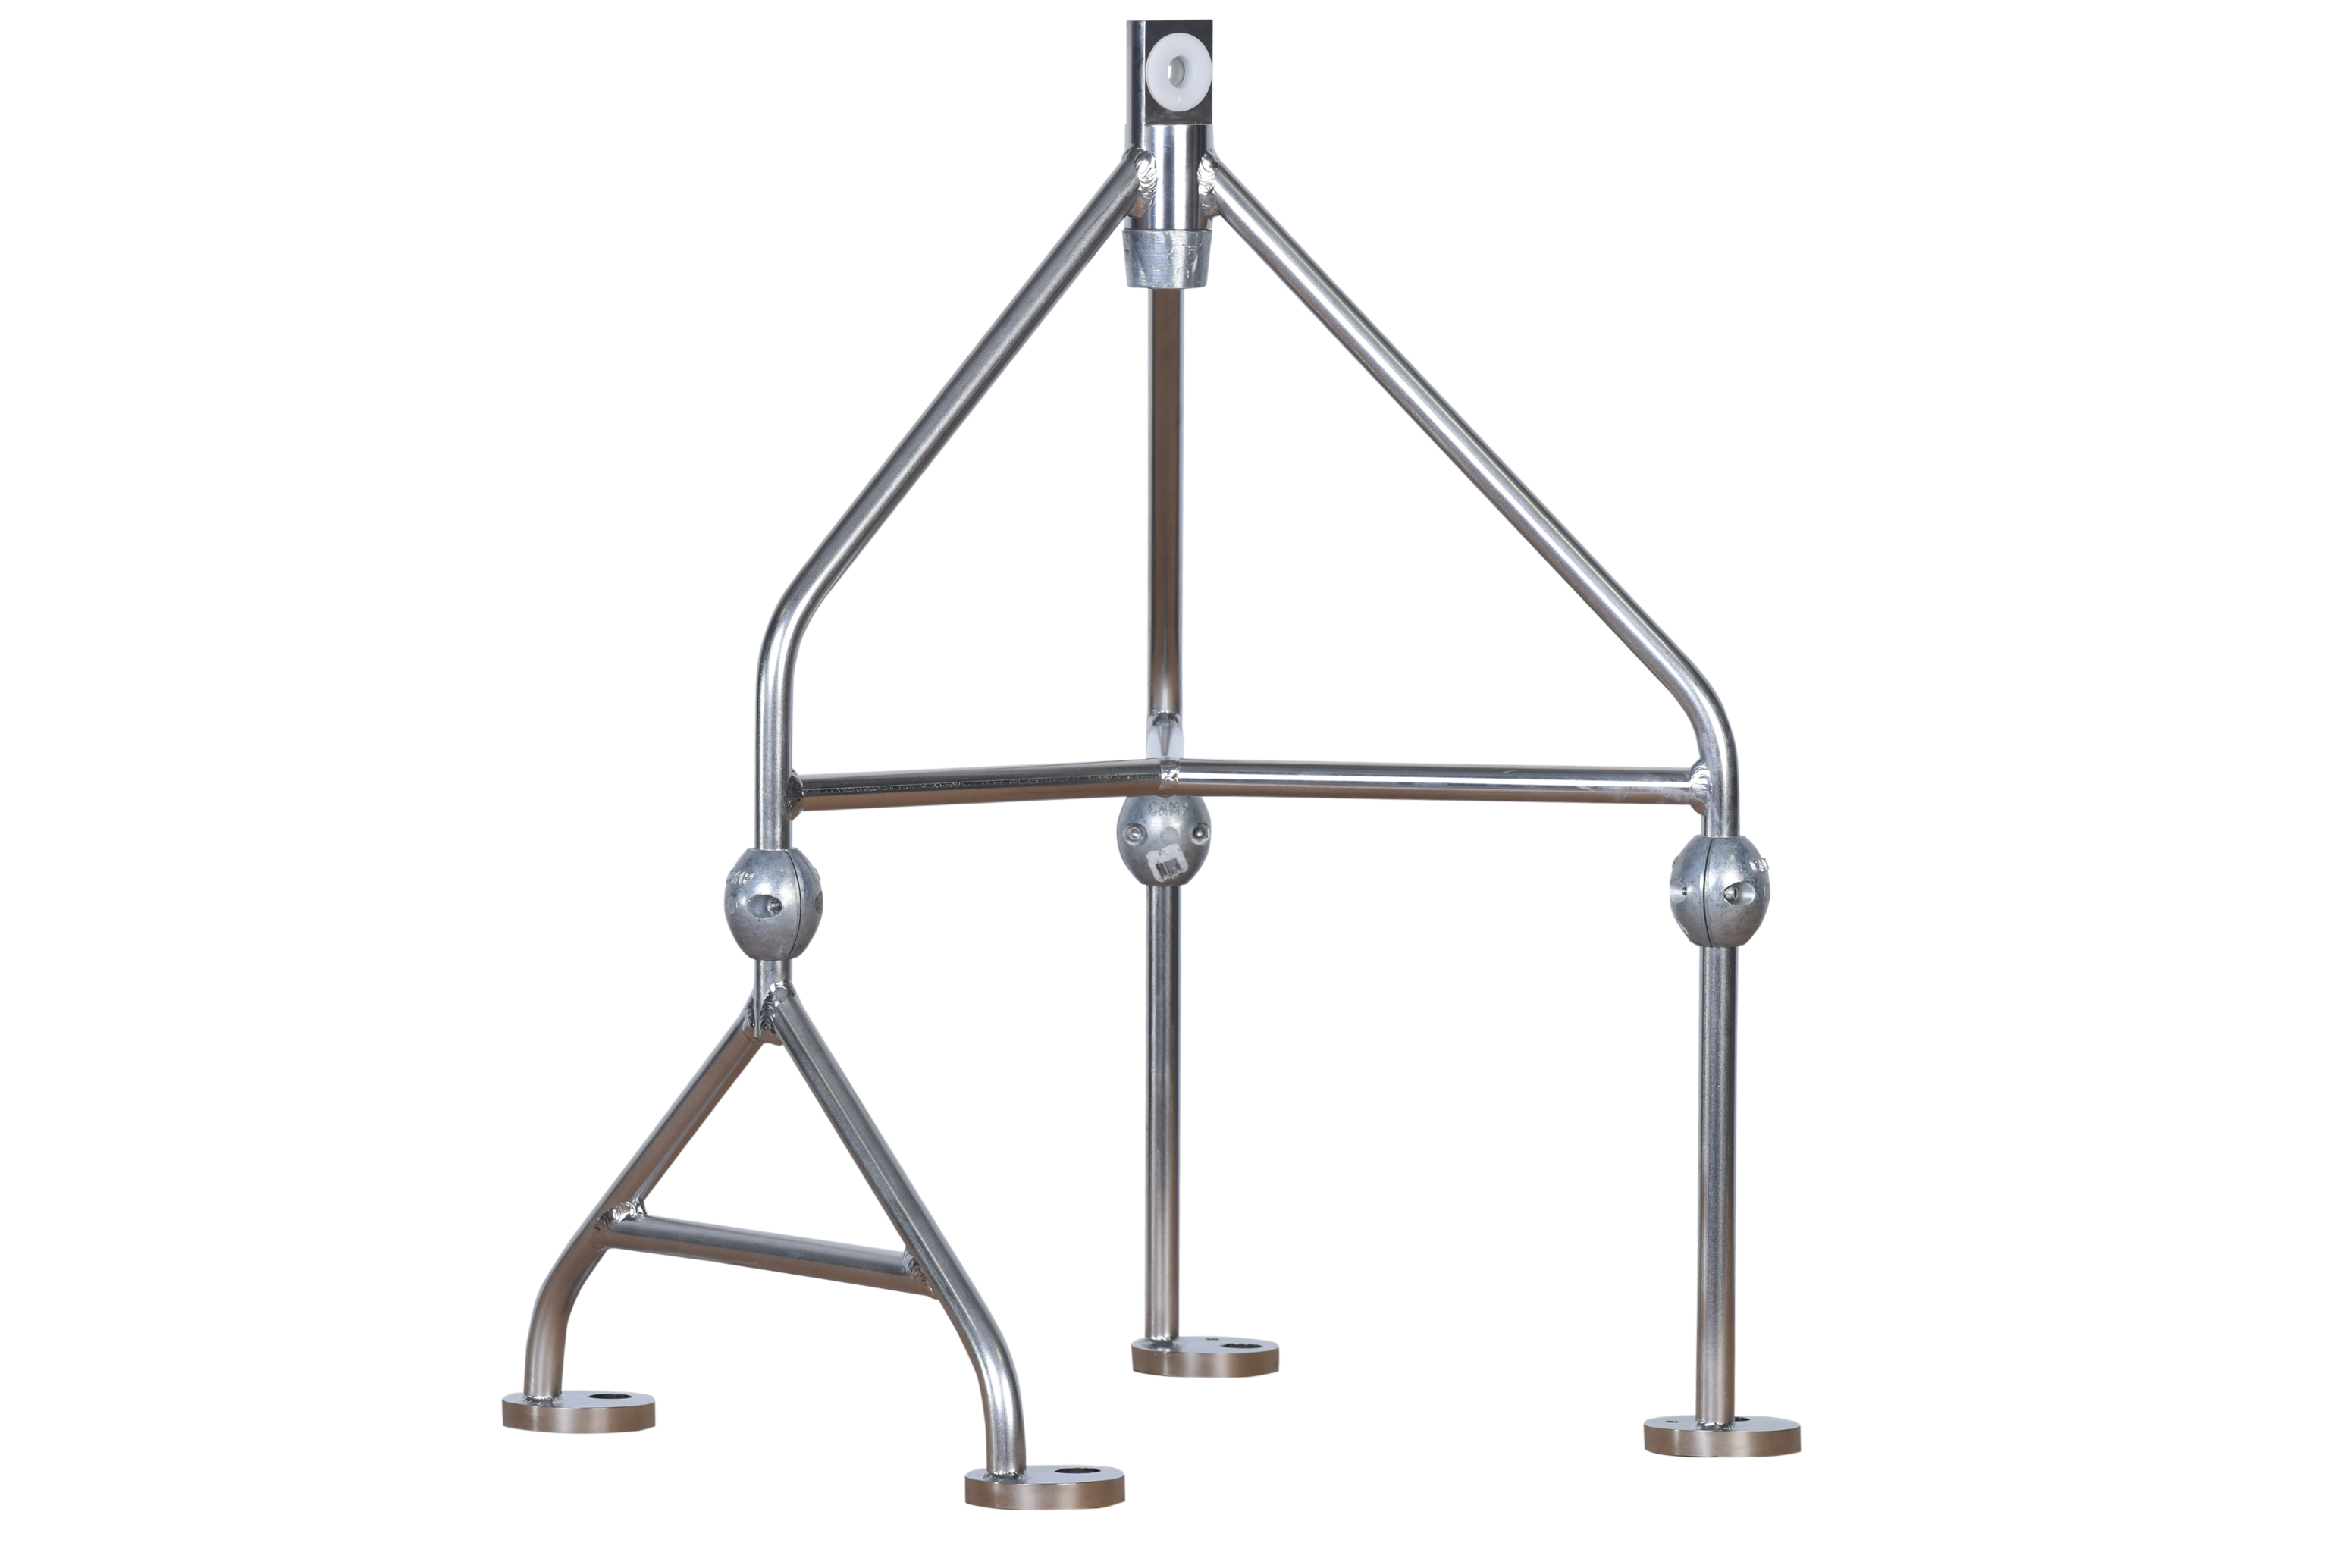 4-3 Buoy Frame for Nortek Signature ADCP